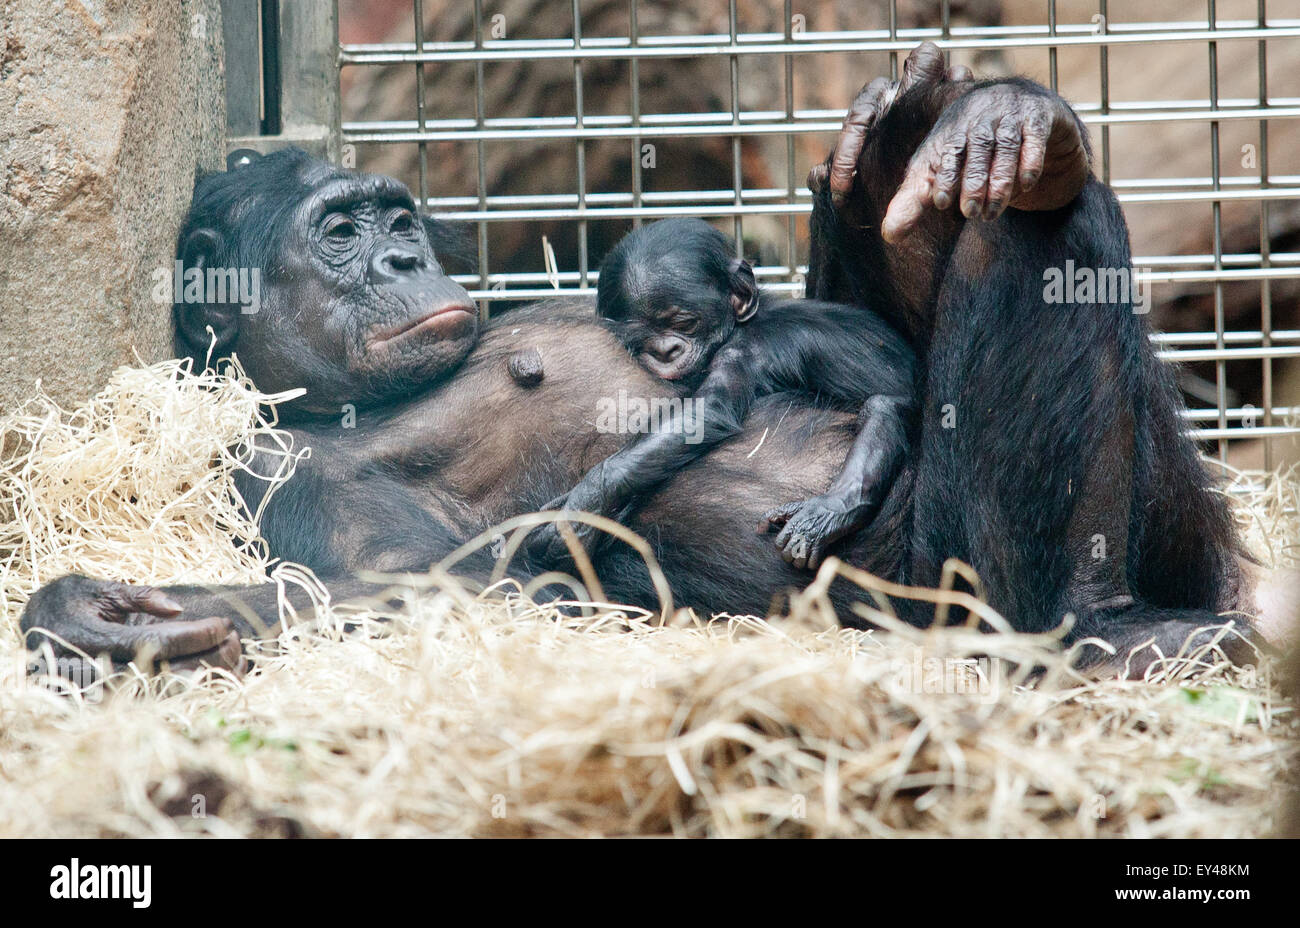 A baby bonobo born on 18 July 2015 holds on to the belly of its mother 'Kutu' as they lie in their enclosure of the zoo in Frankfurt am Main, Germany, 21 July 2015. The baby bonobo has yet to be named as its gender is currently still unknown. Photo: CHRISTOPH SCHMIDT/dpa Stock Photo